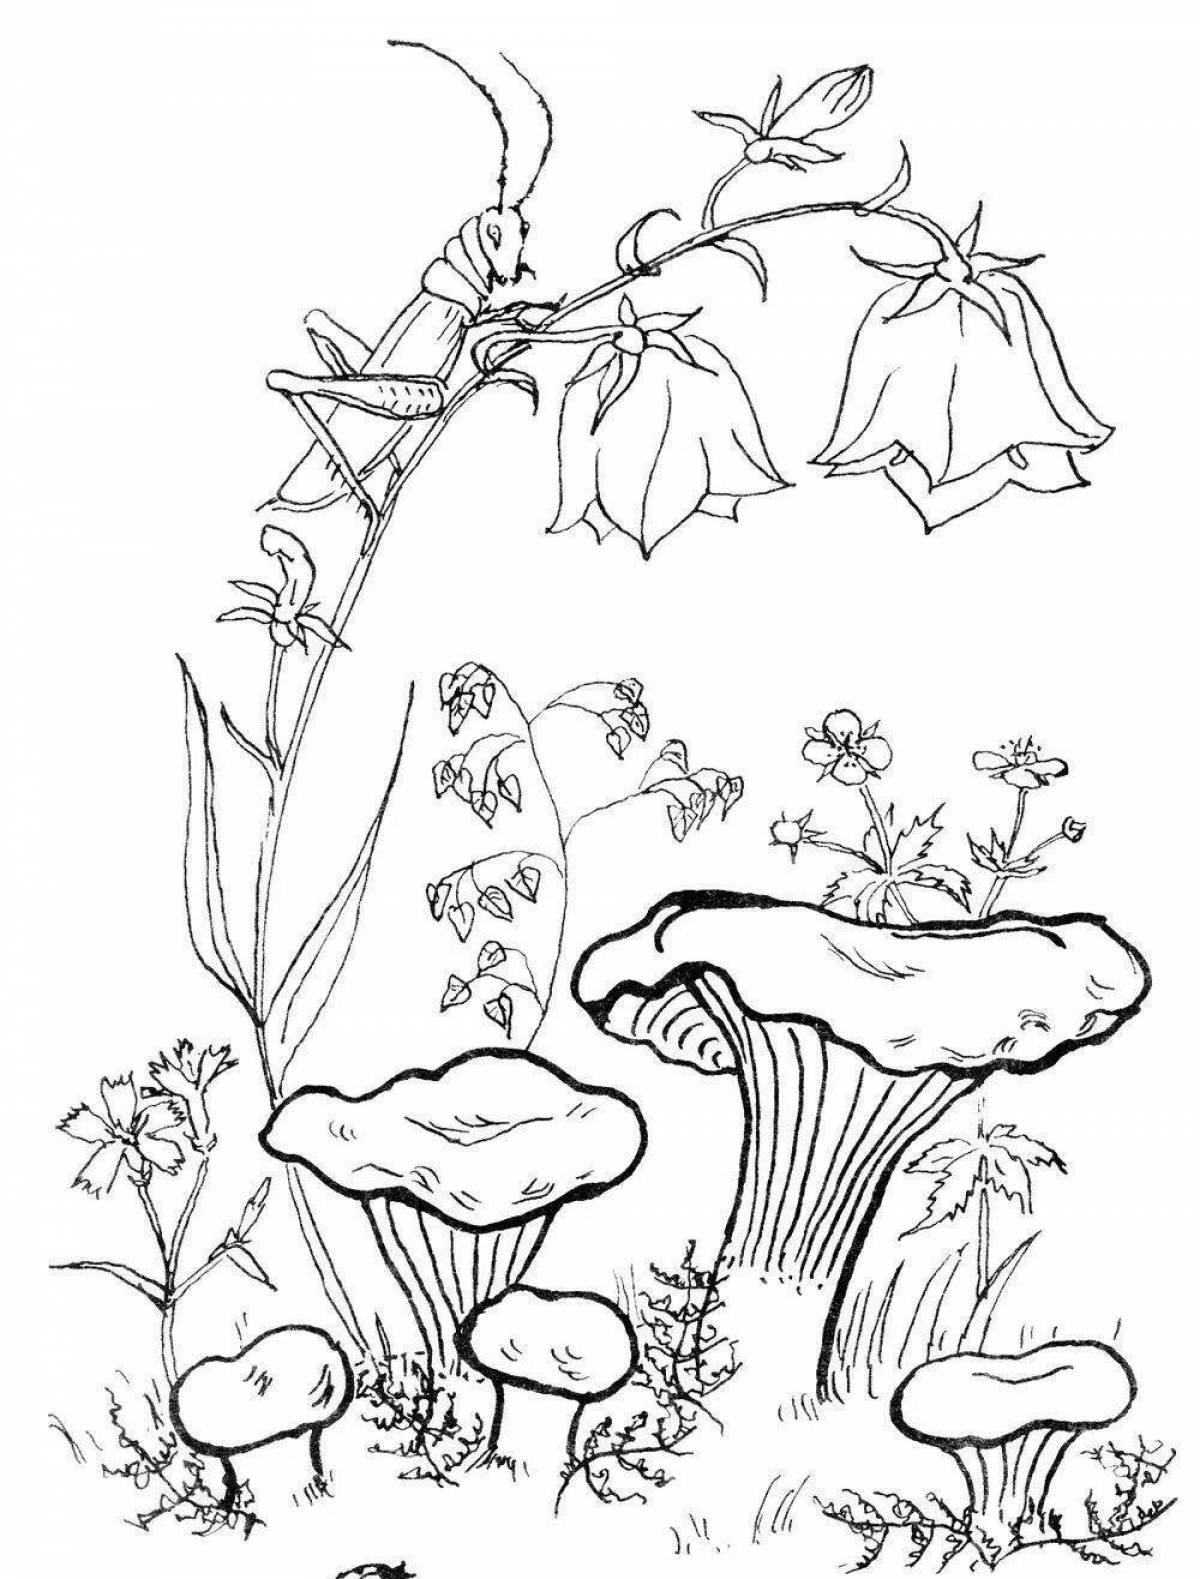 Fancy russula coloring book